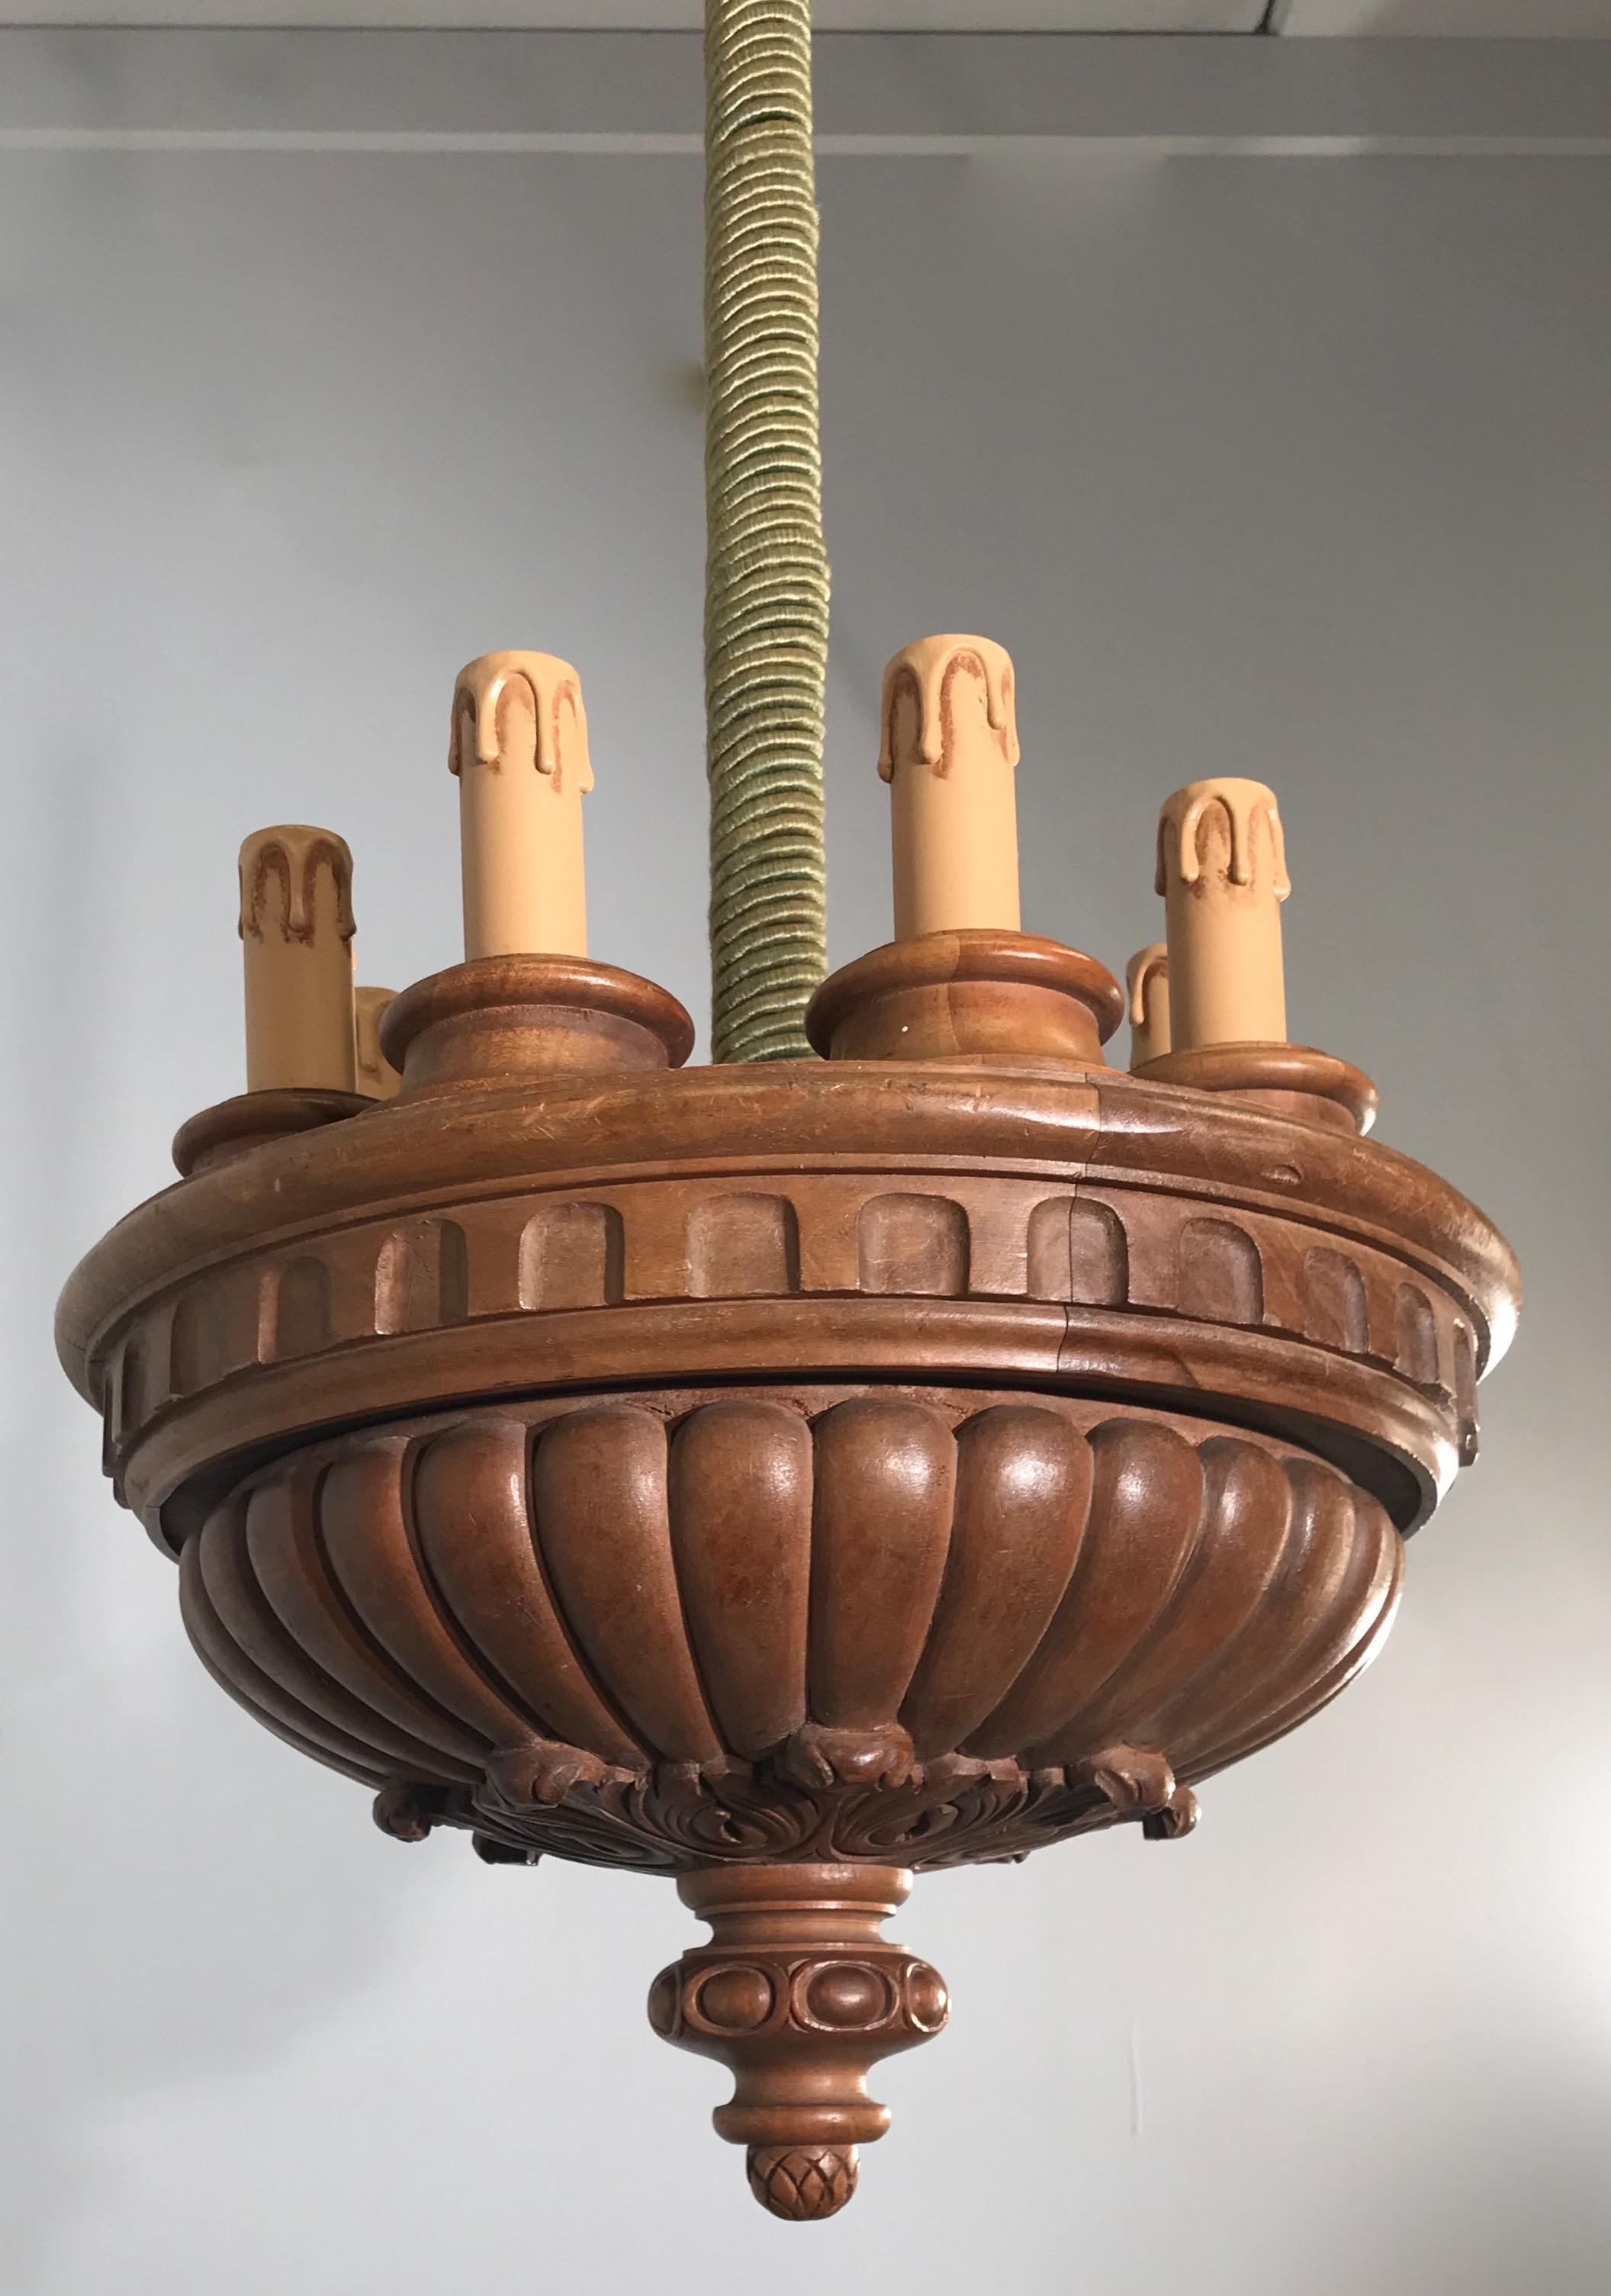 Brass Rare and Decorative Early 1900s Eight-Light Quality Carved Nutwood Pendant Light For Sale